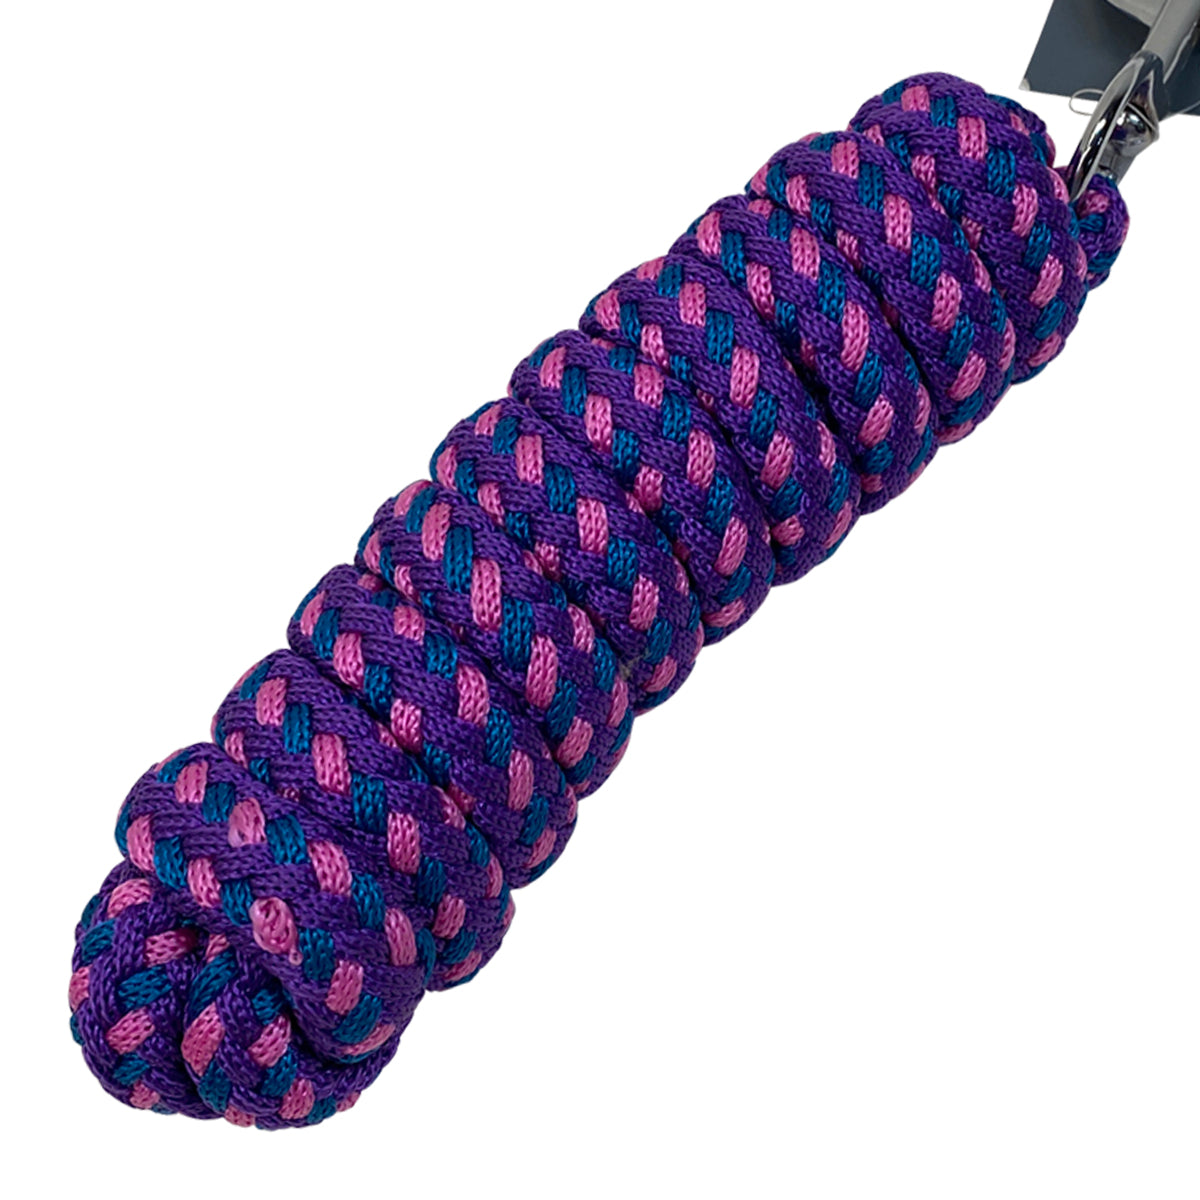 Tough1 Braided Poly Cord Lead Rope in Purple/Turquoise/Pink